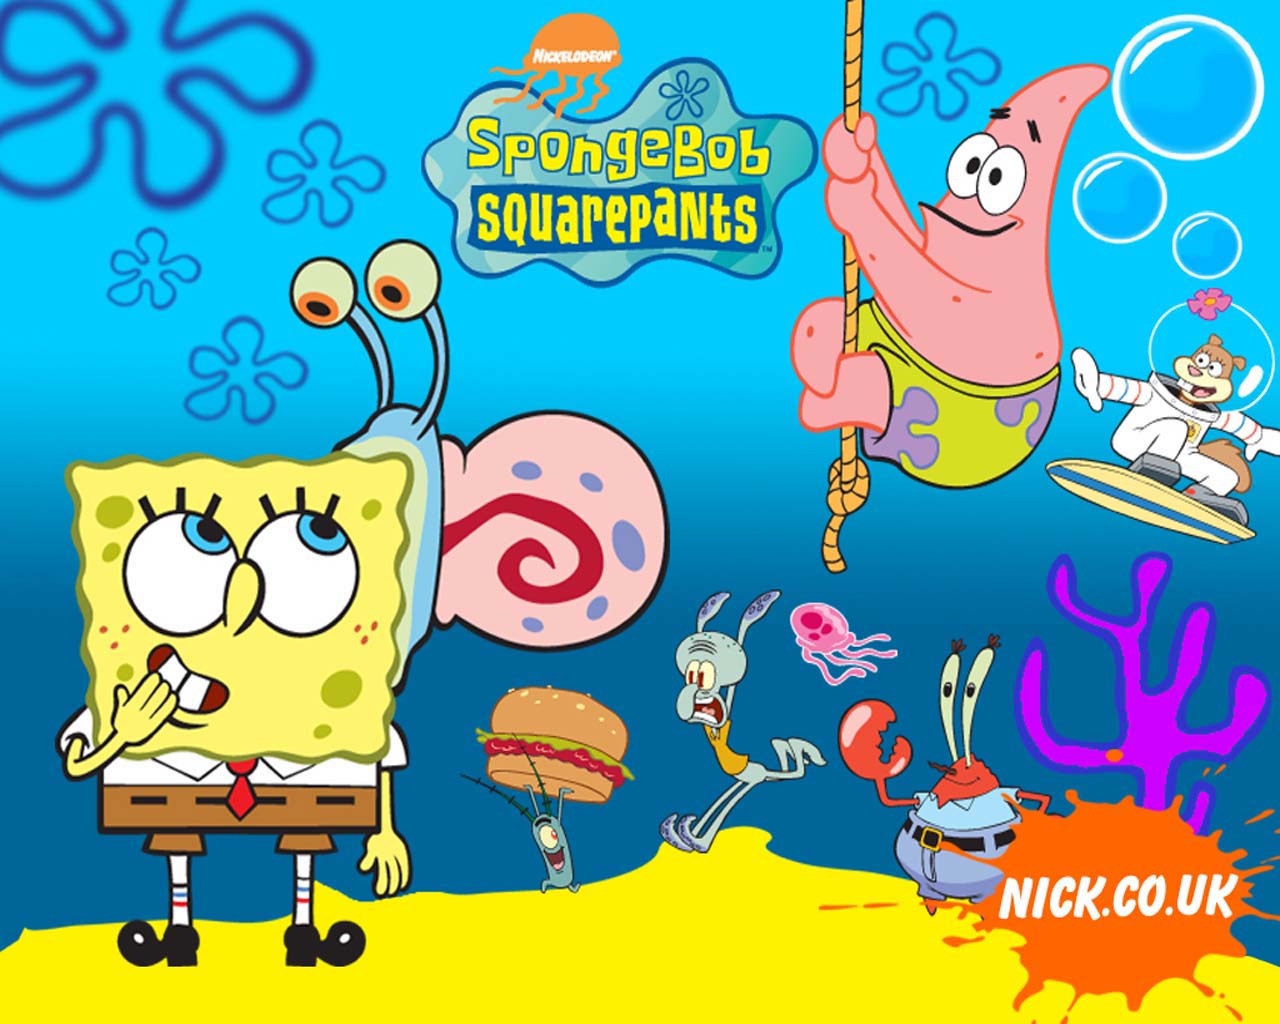 Spongebob Squarepants. This entry was posted on